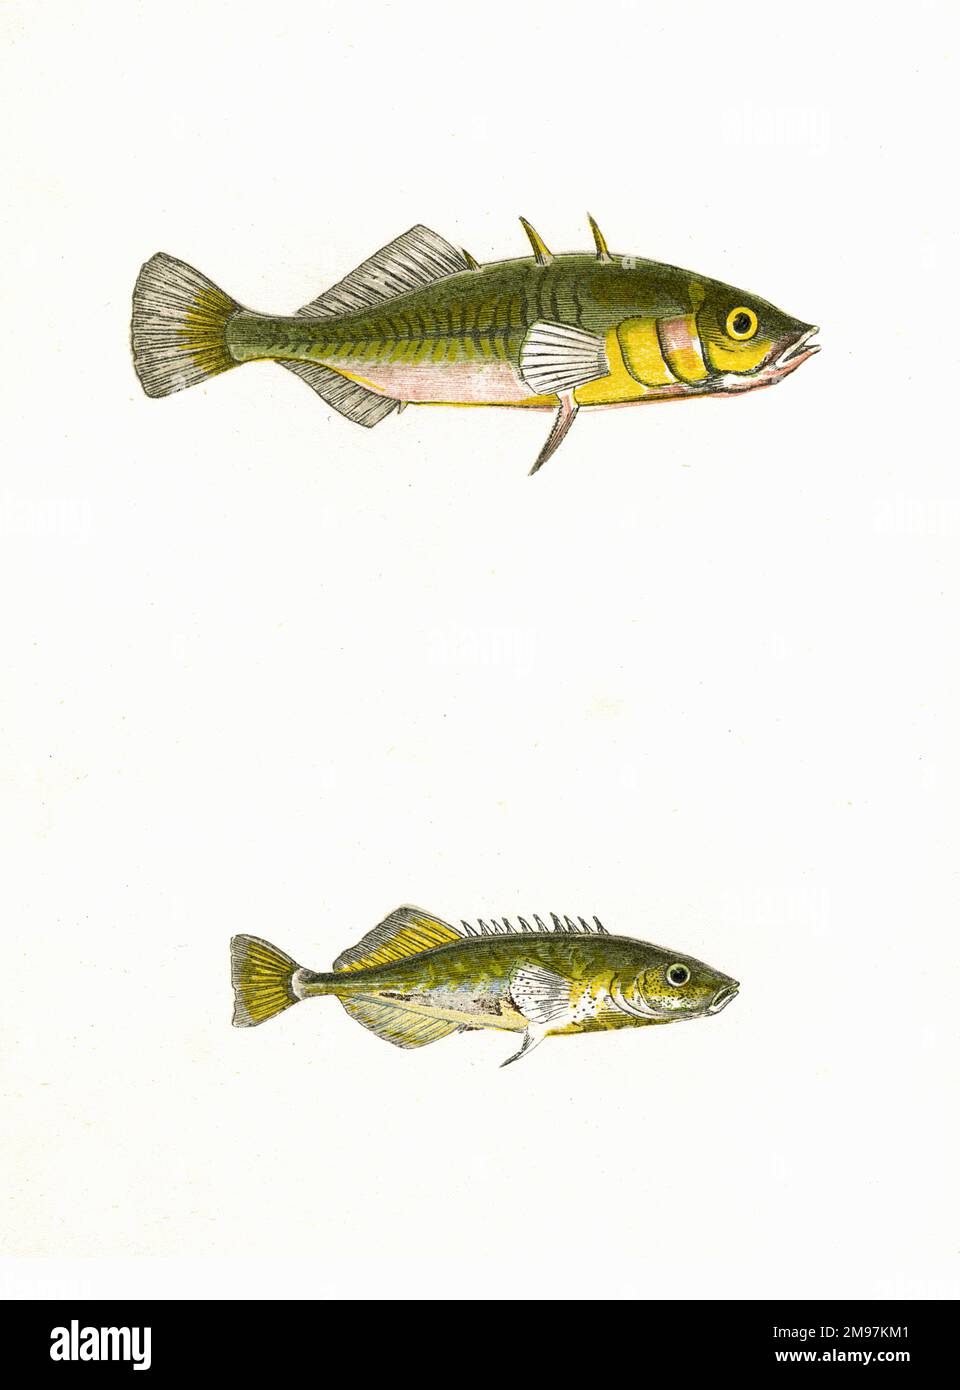 Three-Spined Stickleback (Gasterosteus aculeatus, above), also known as Banstickle, Minnis, Sharpling and Pricklefish, and Tinker (Gasterosteus pungitius, below), also known as Ten-Spined Stickleback. Stock Photo